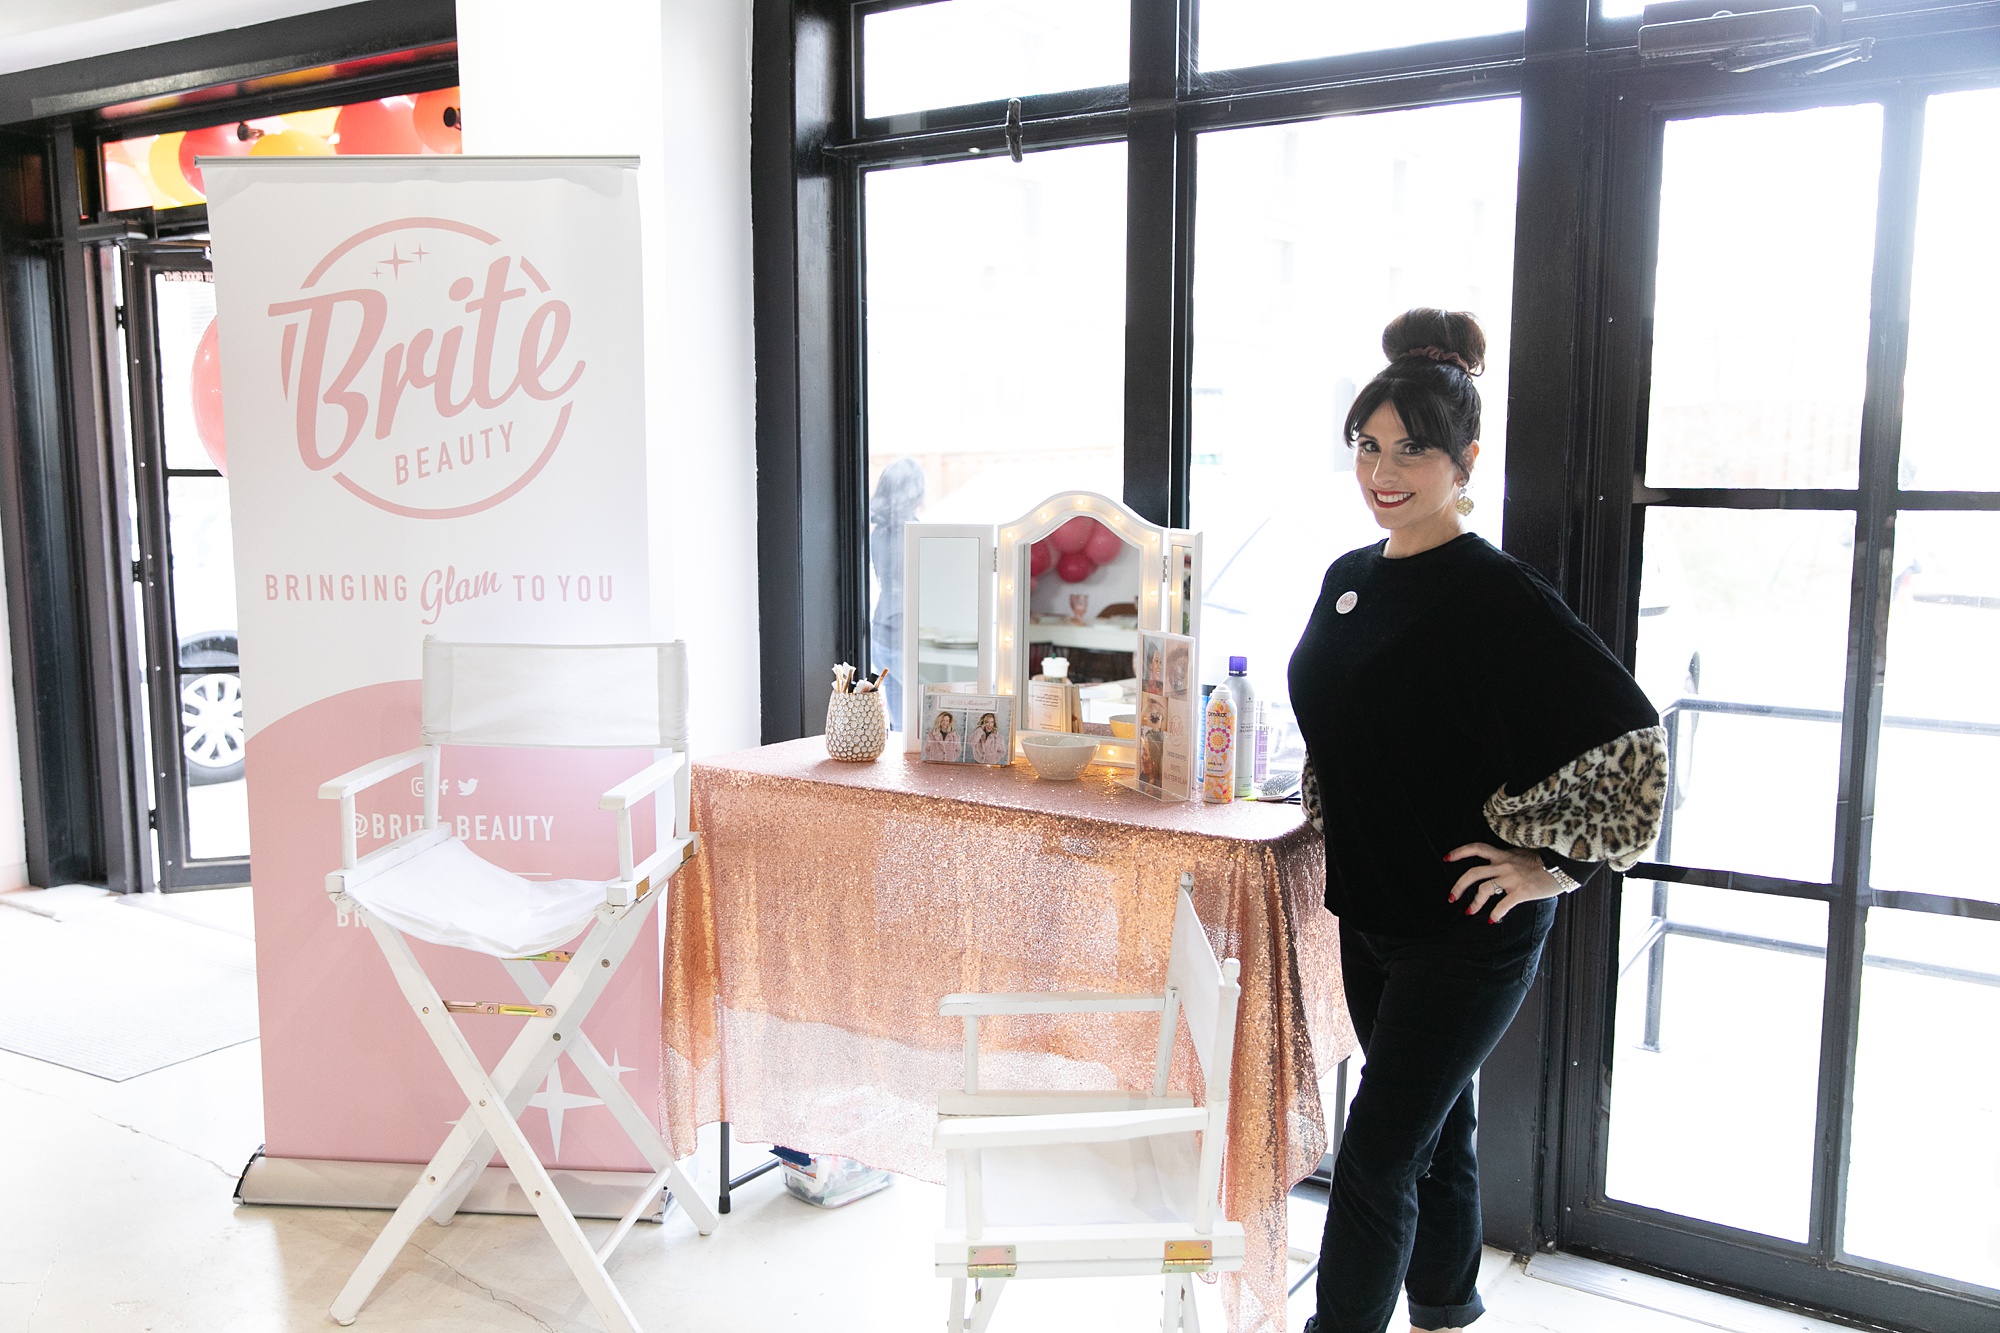 Brite Beauty station at Dallas Girl Gang event